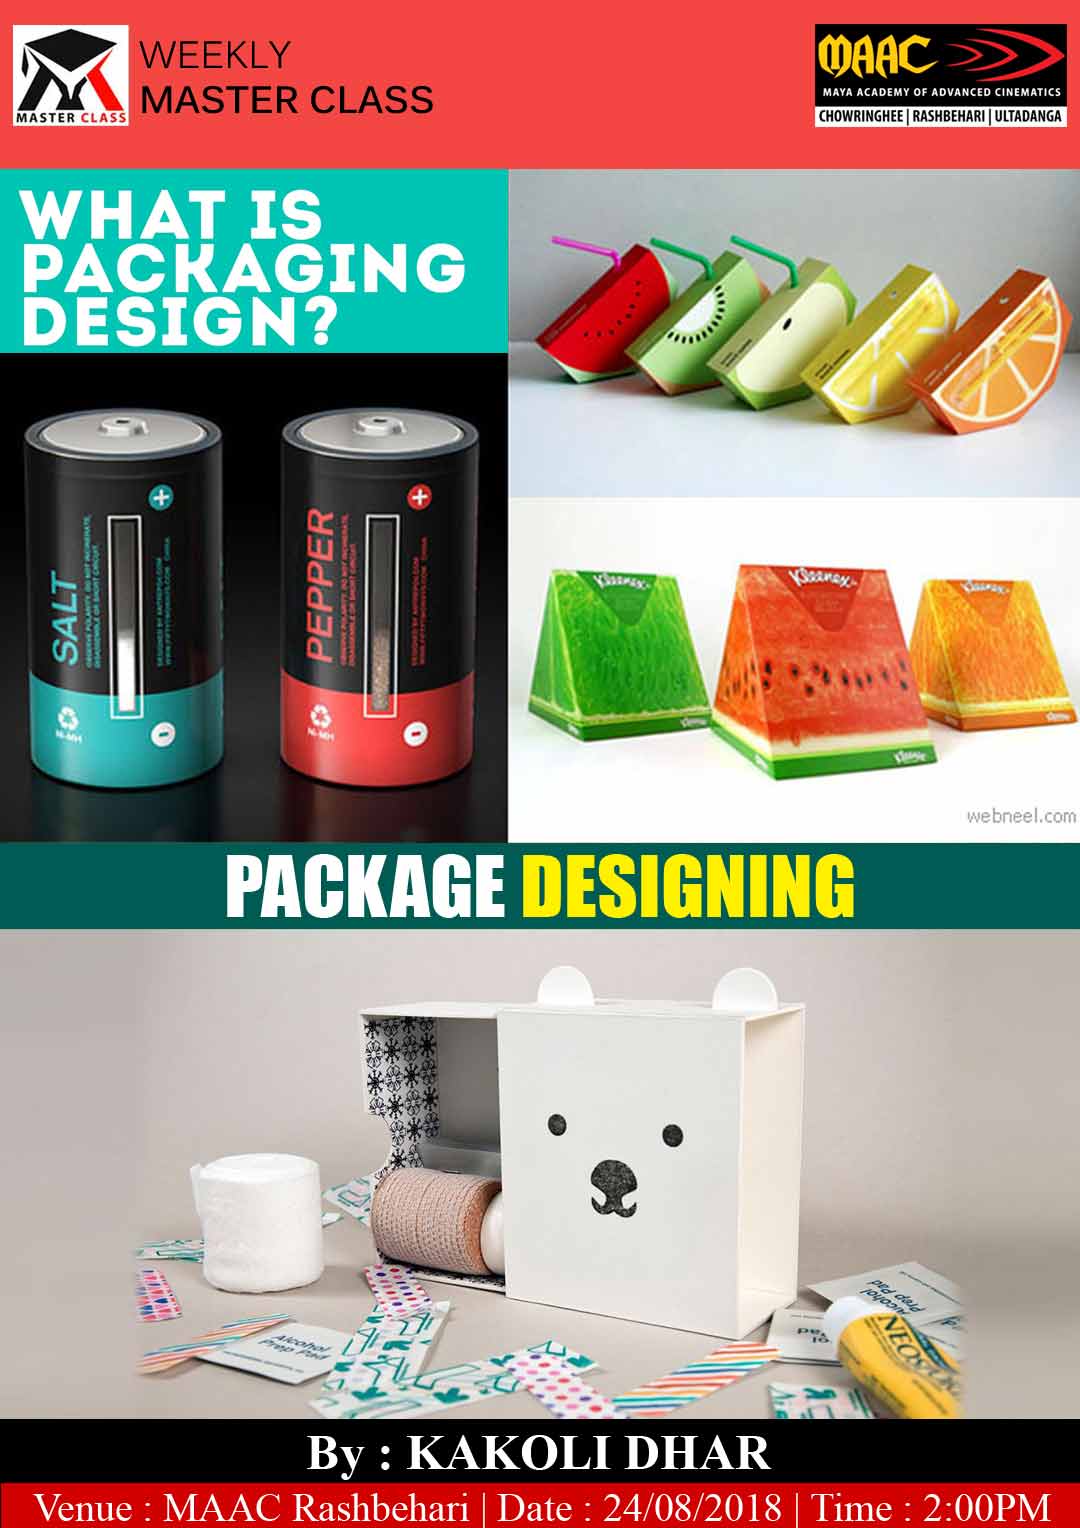 Weekly Master Class on Package Designing